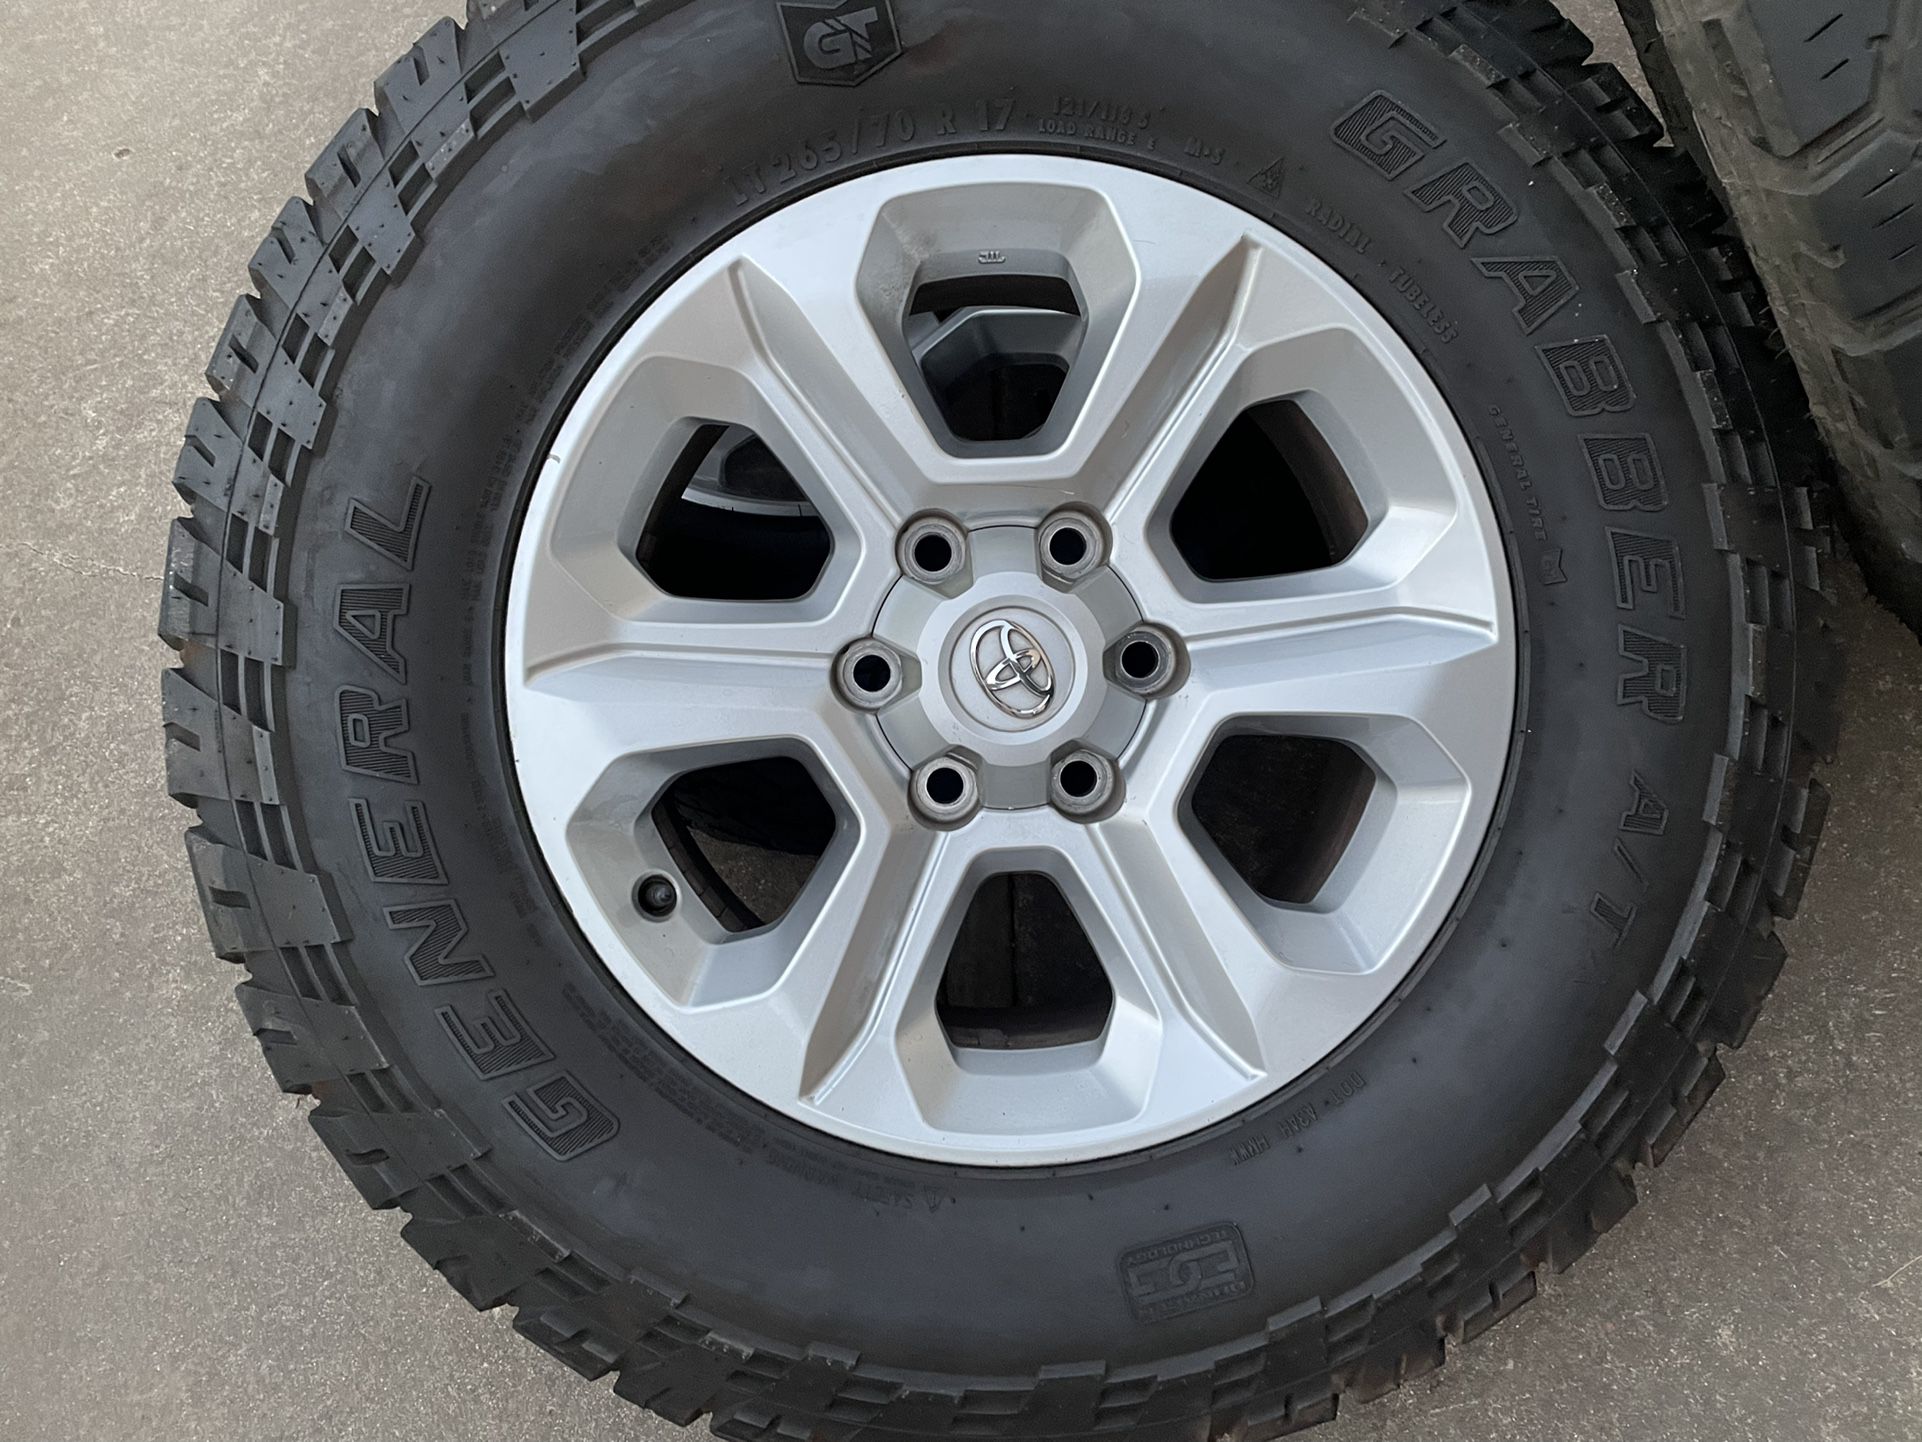 Toyota Rims And Tires